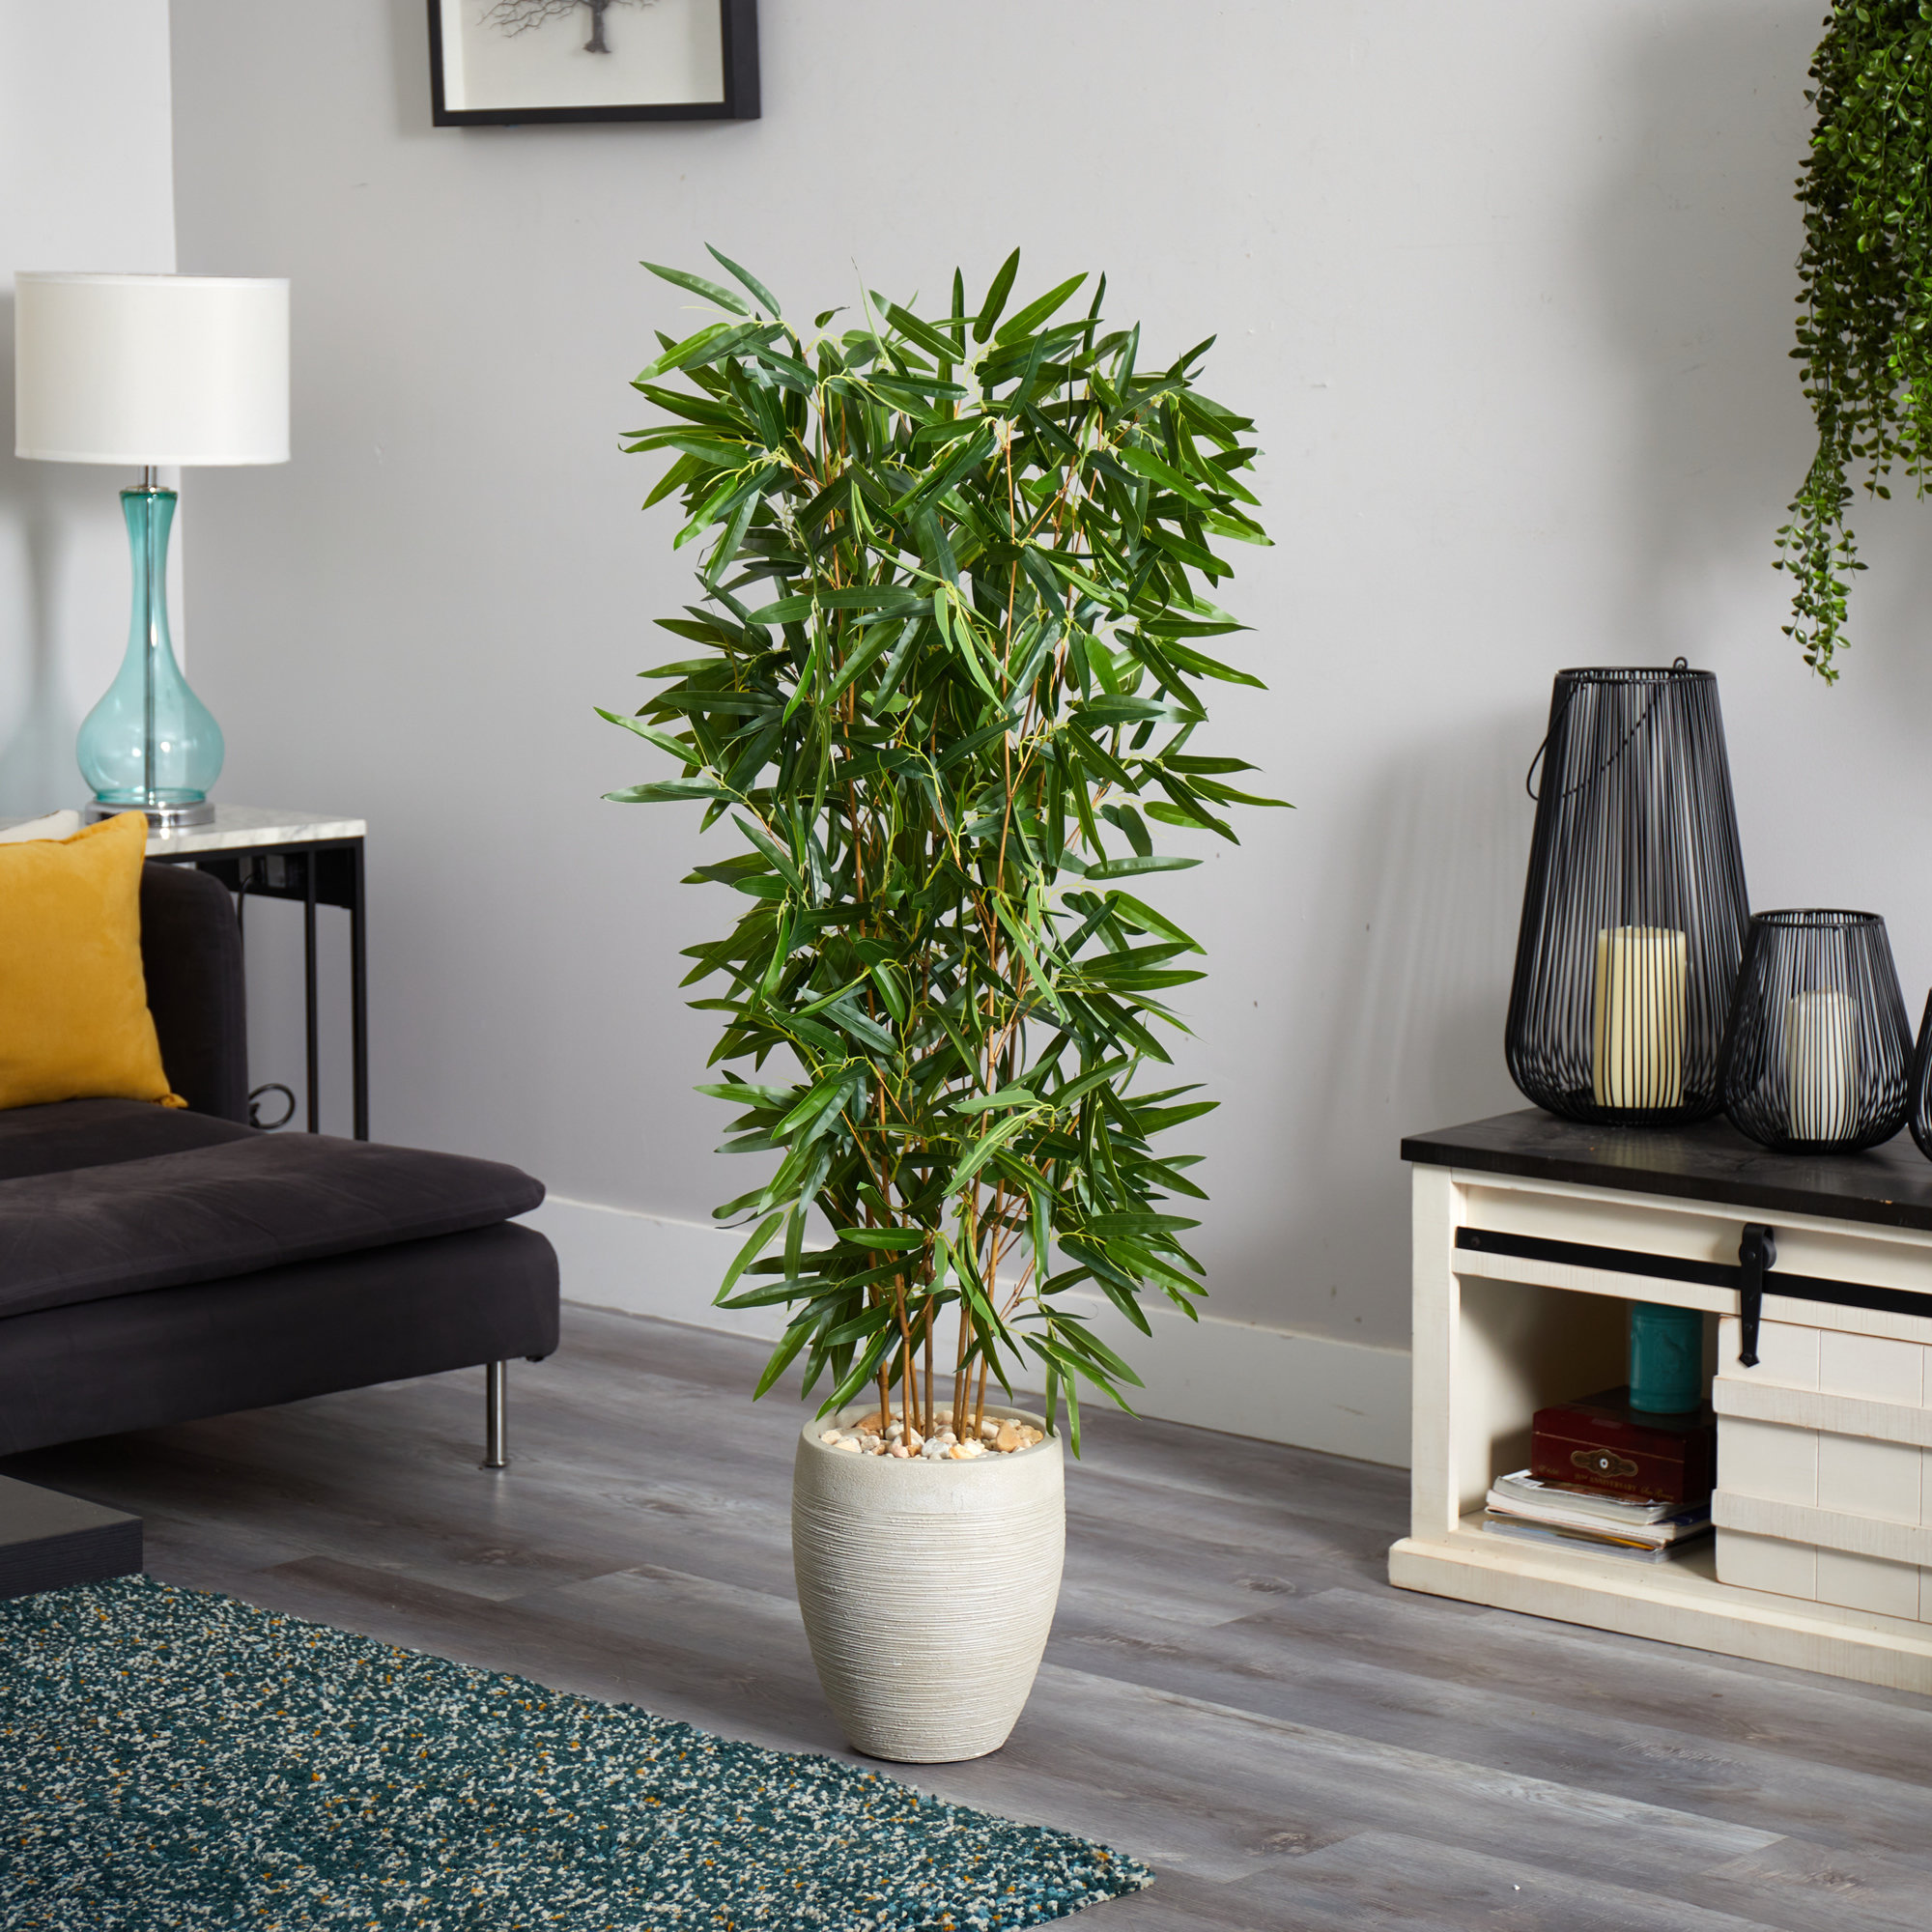 Artificial Bamboo plant for outdoors